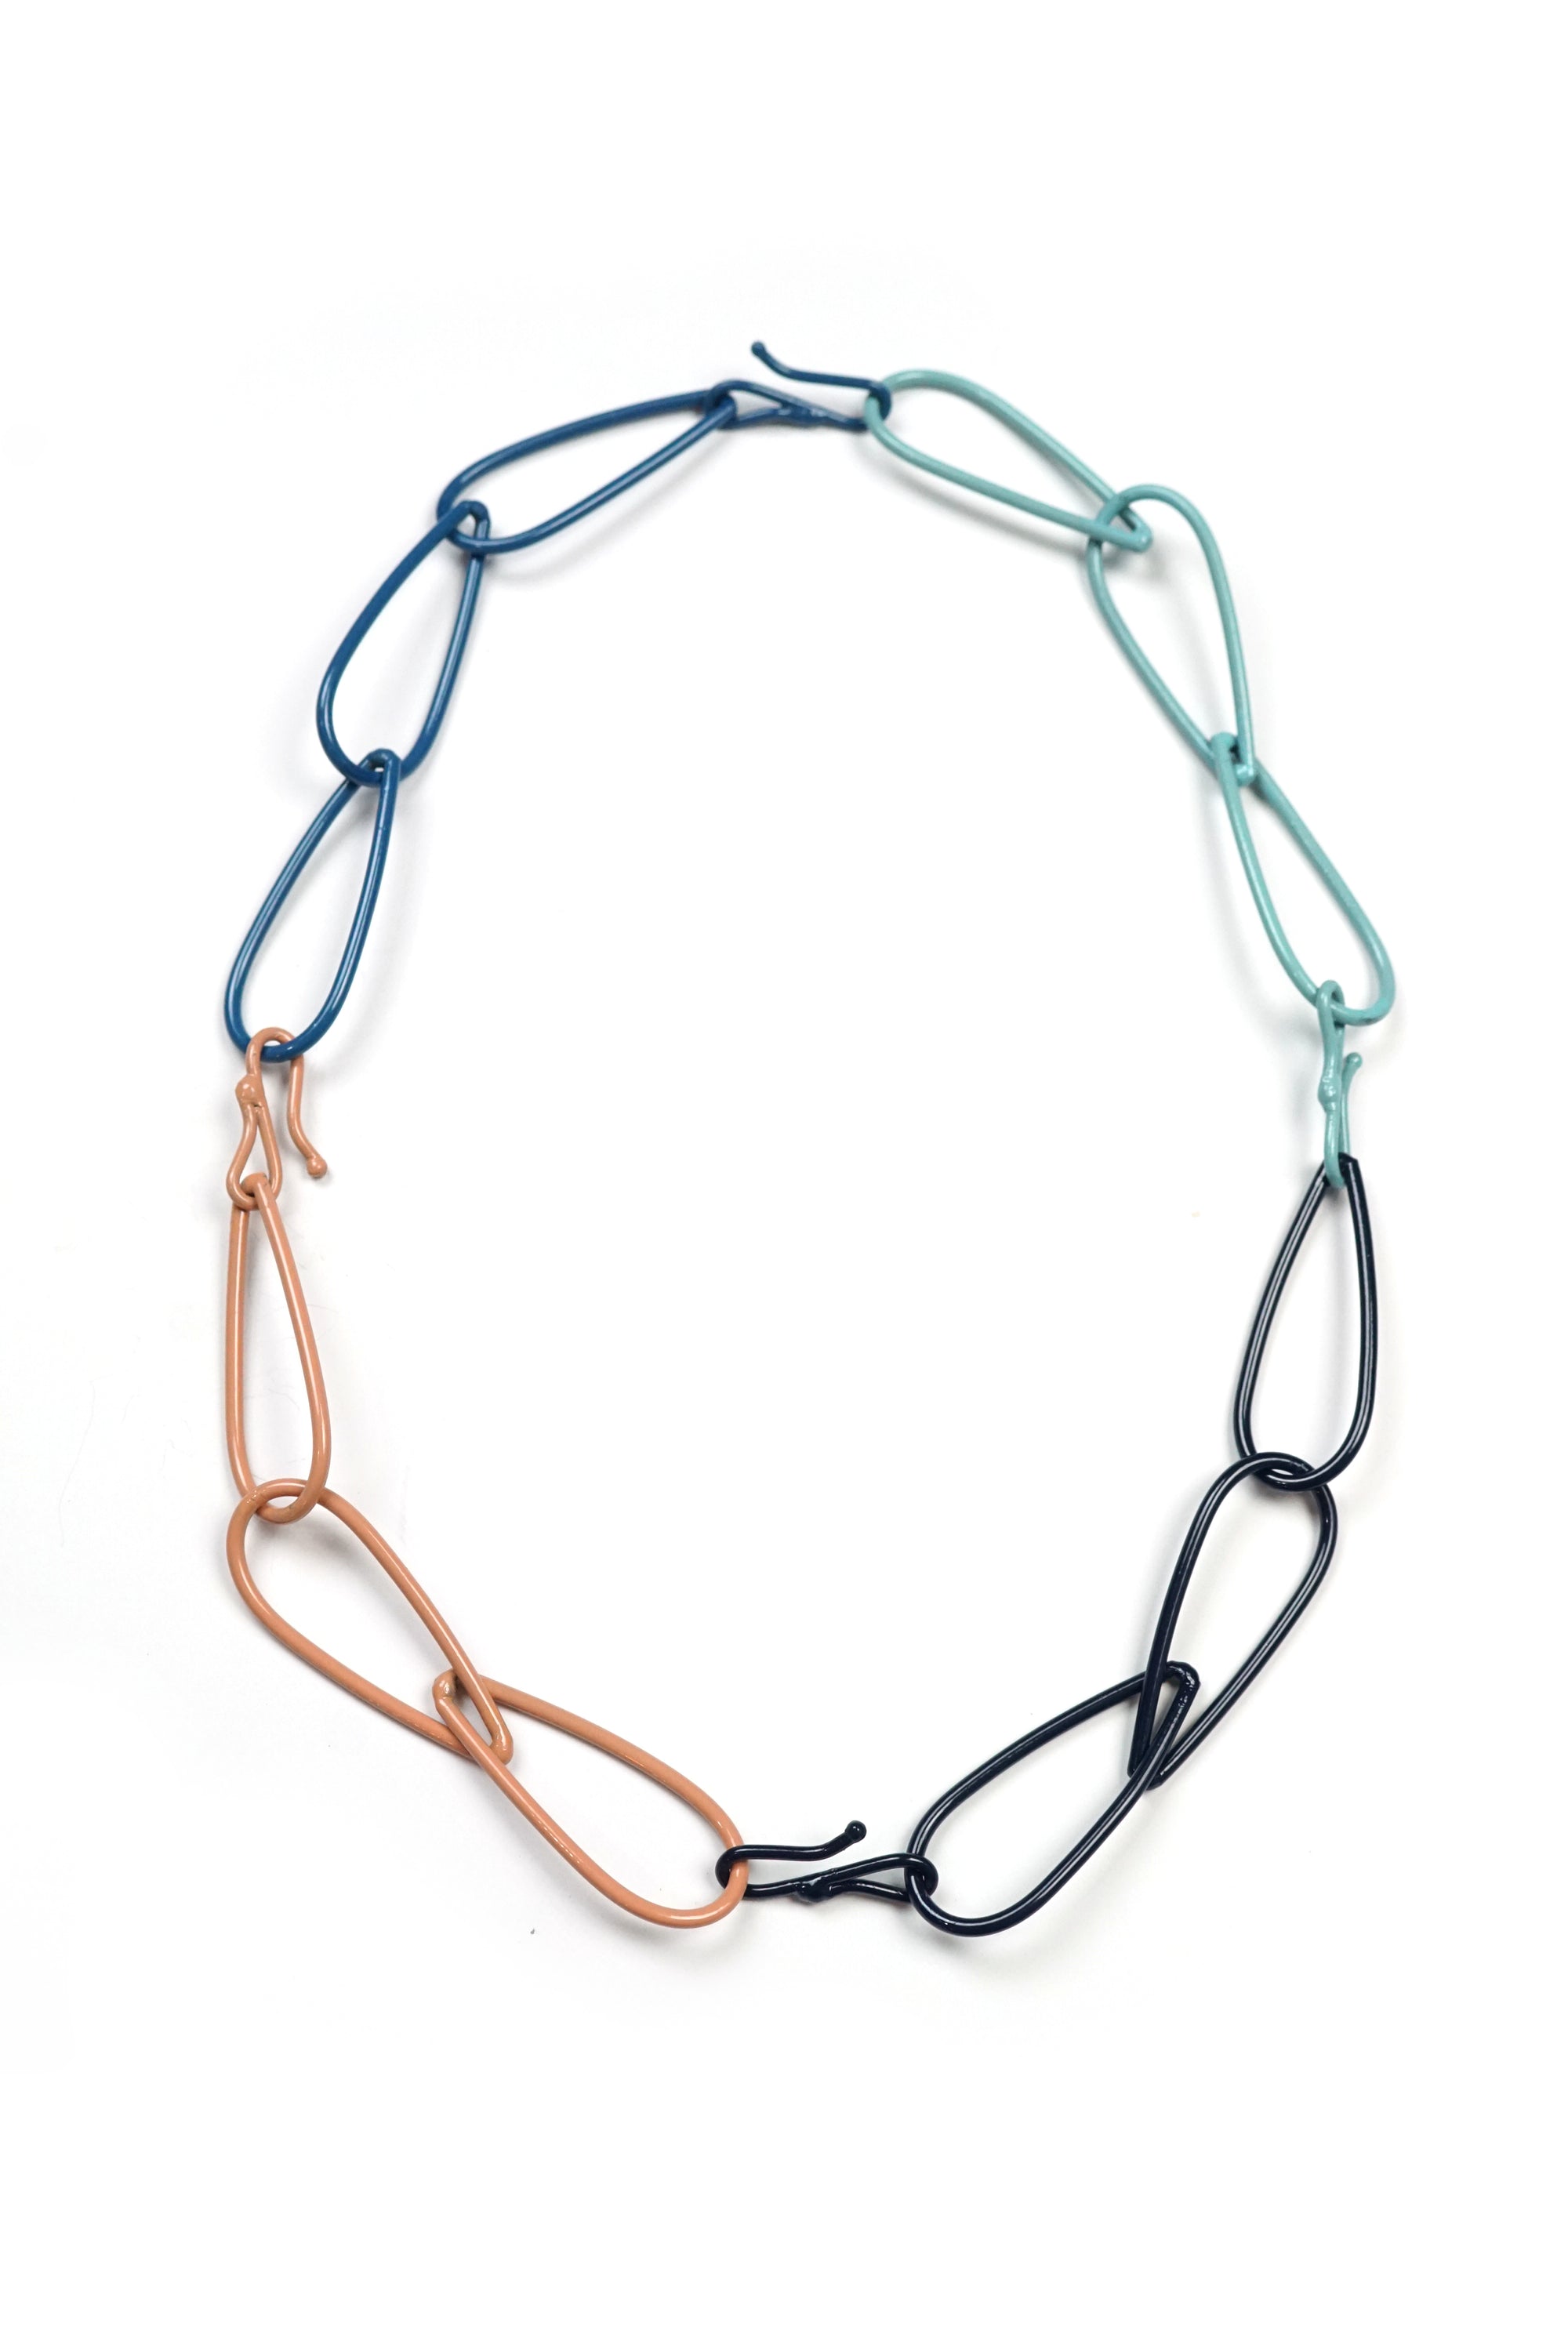 Modular Necklace in Dark Navy, Azure Blue, Faded Teal, and Dusty Rose